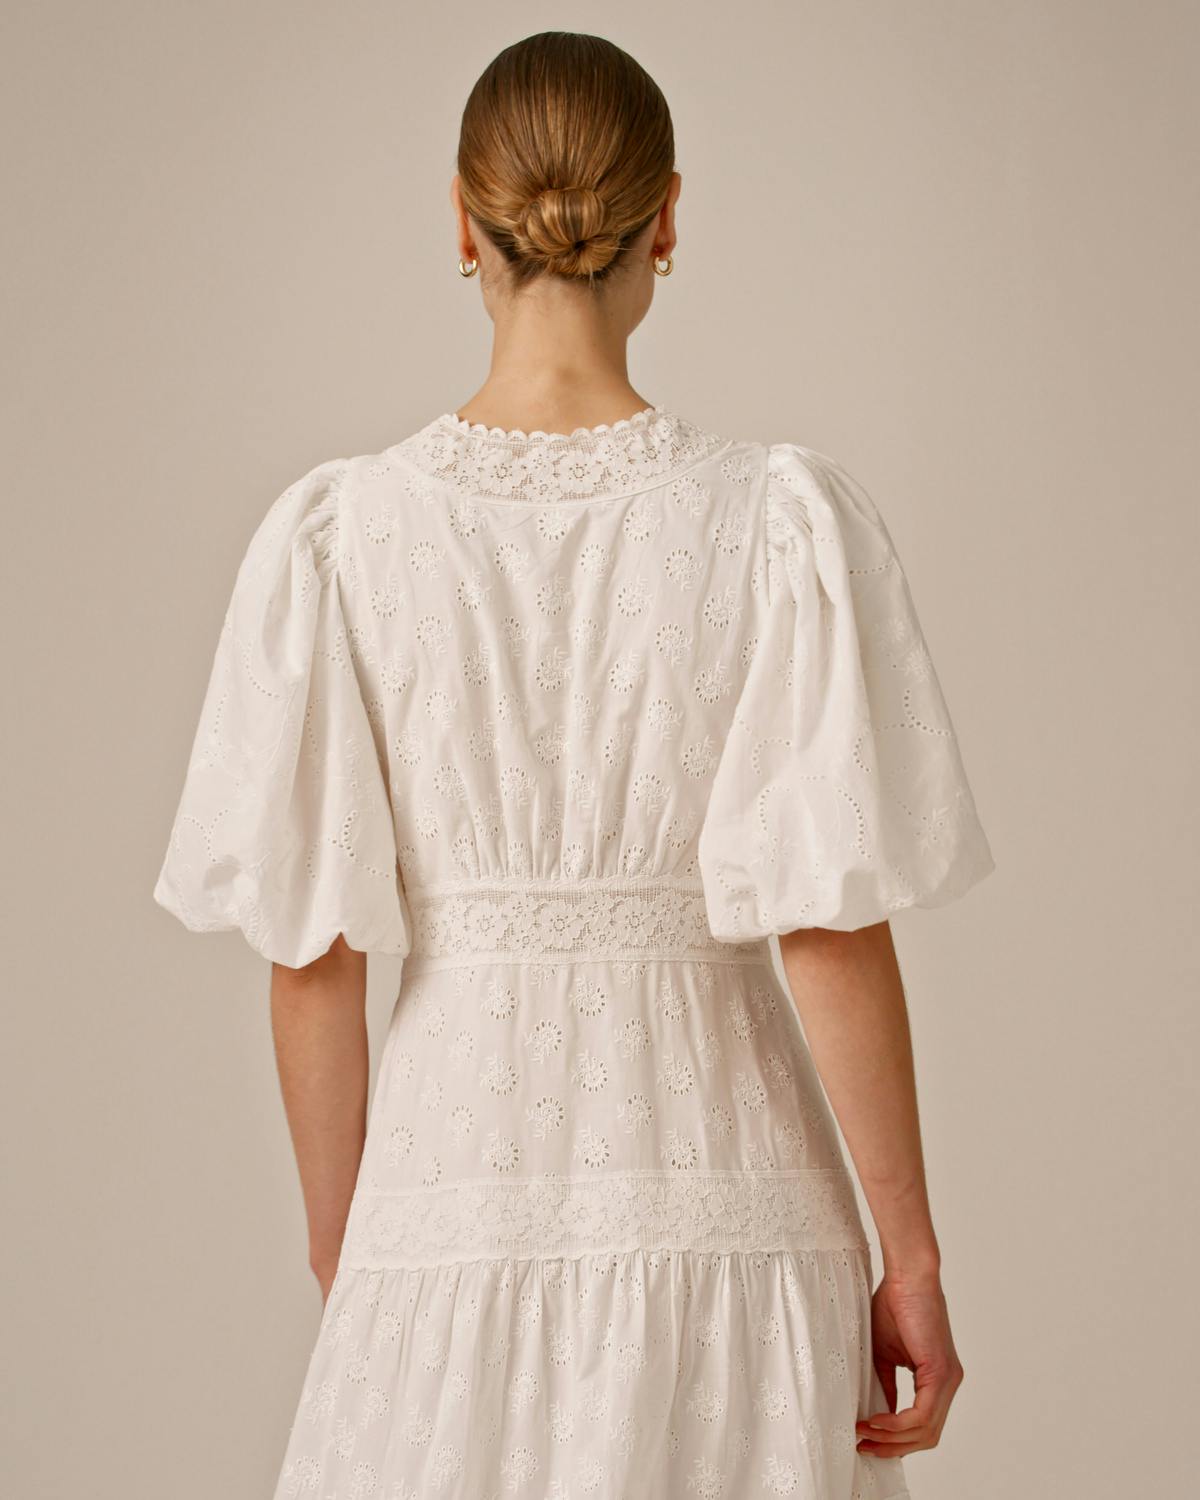 Broderie Anglaise Maxi Dress, White. Image #3